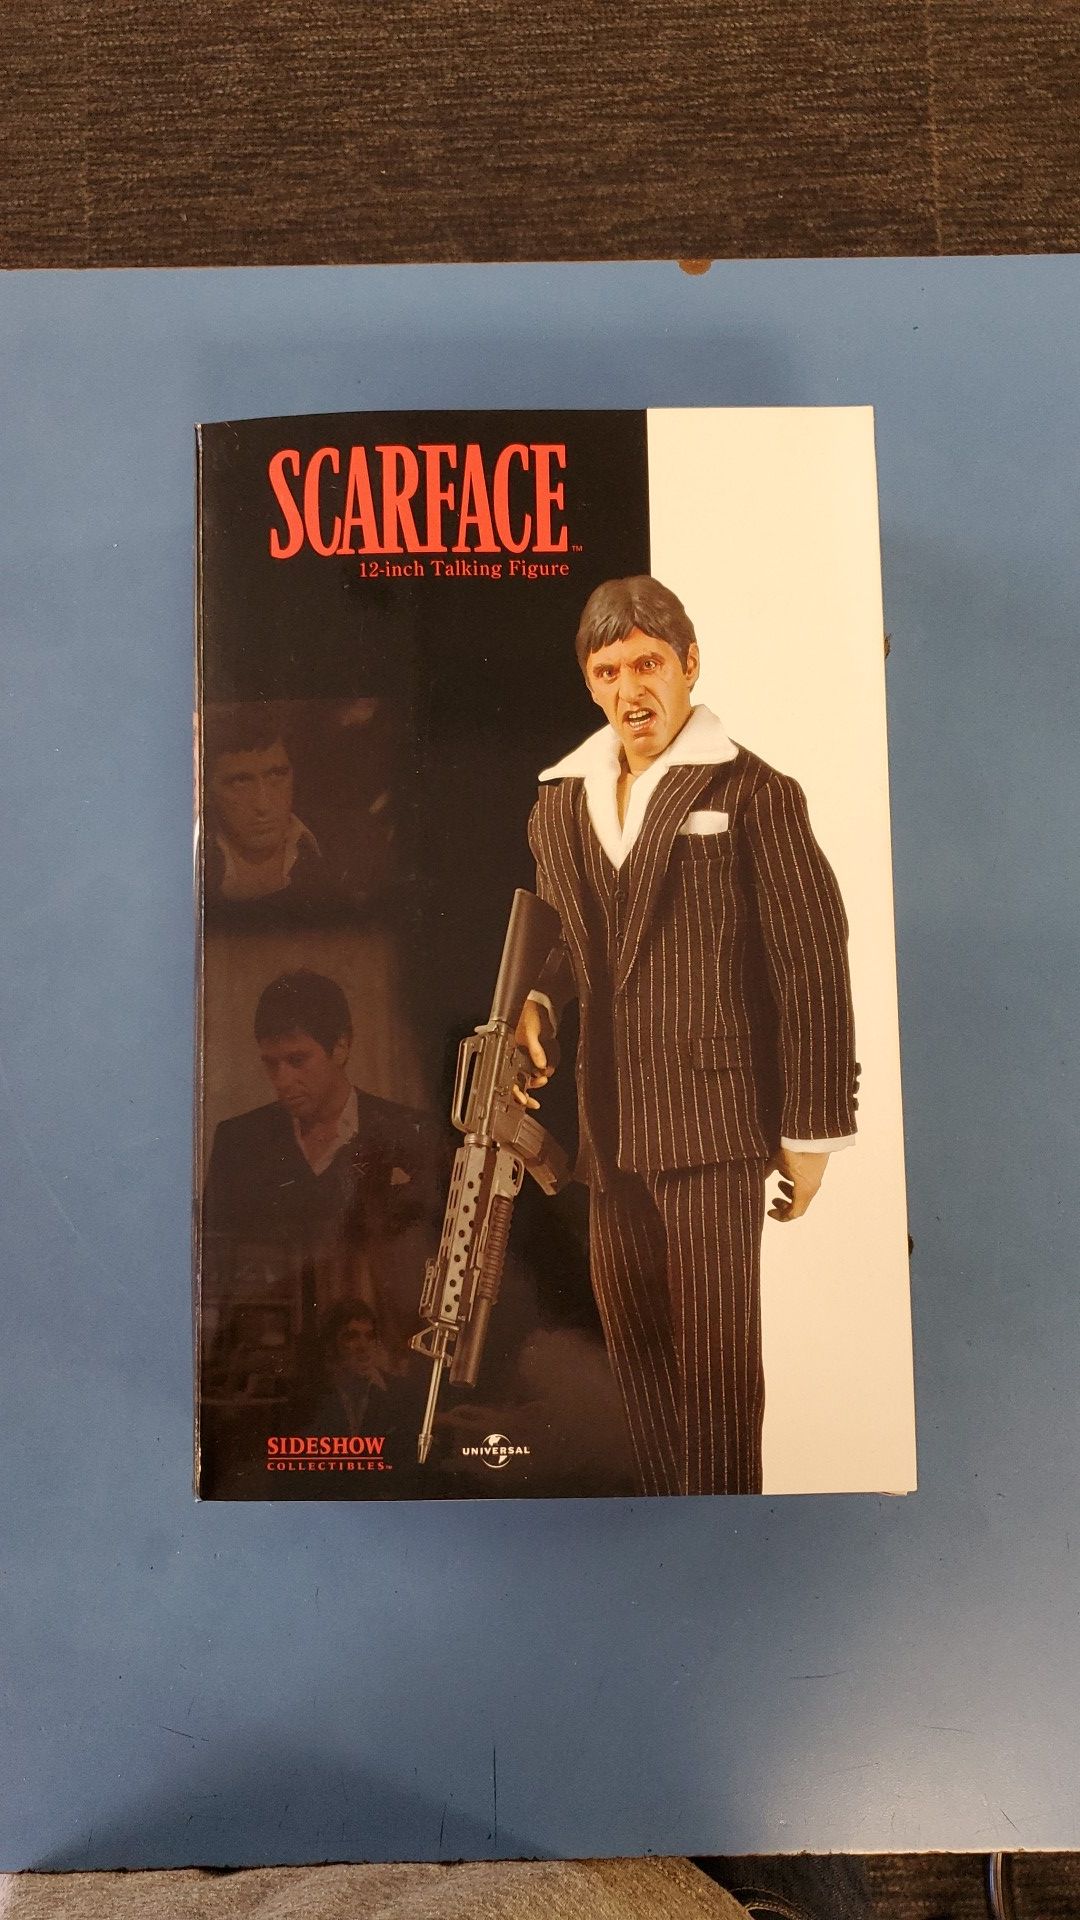 Scarface 12" talking Tony Montana Sideshow Collectibles